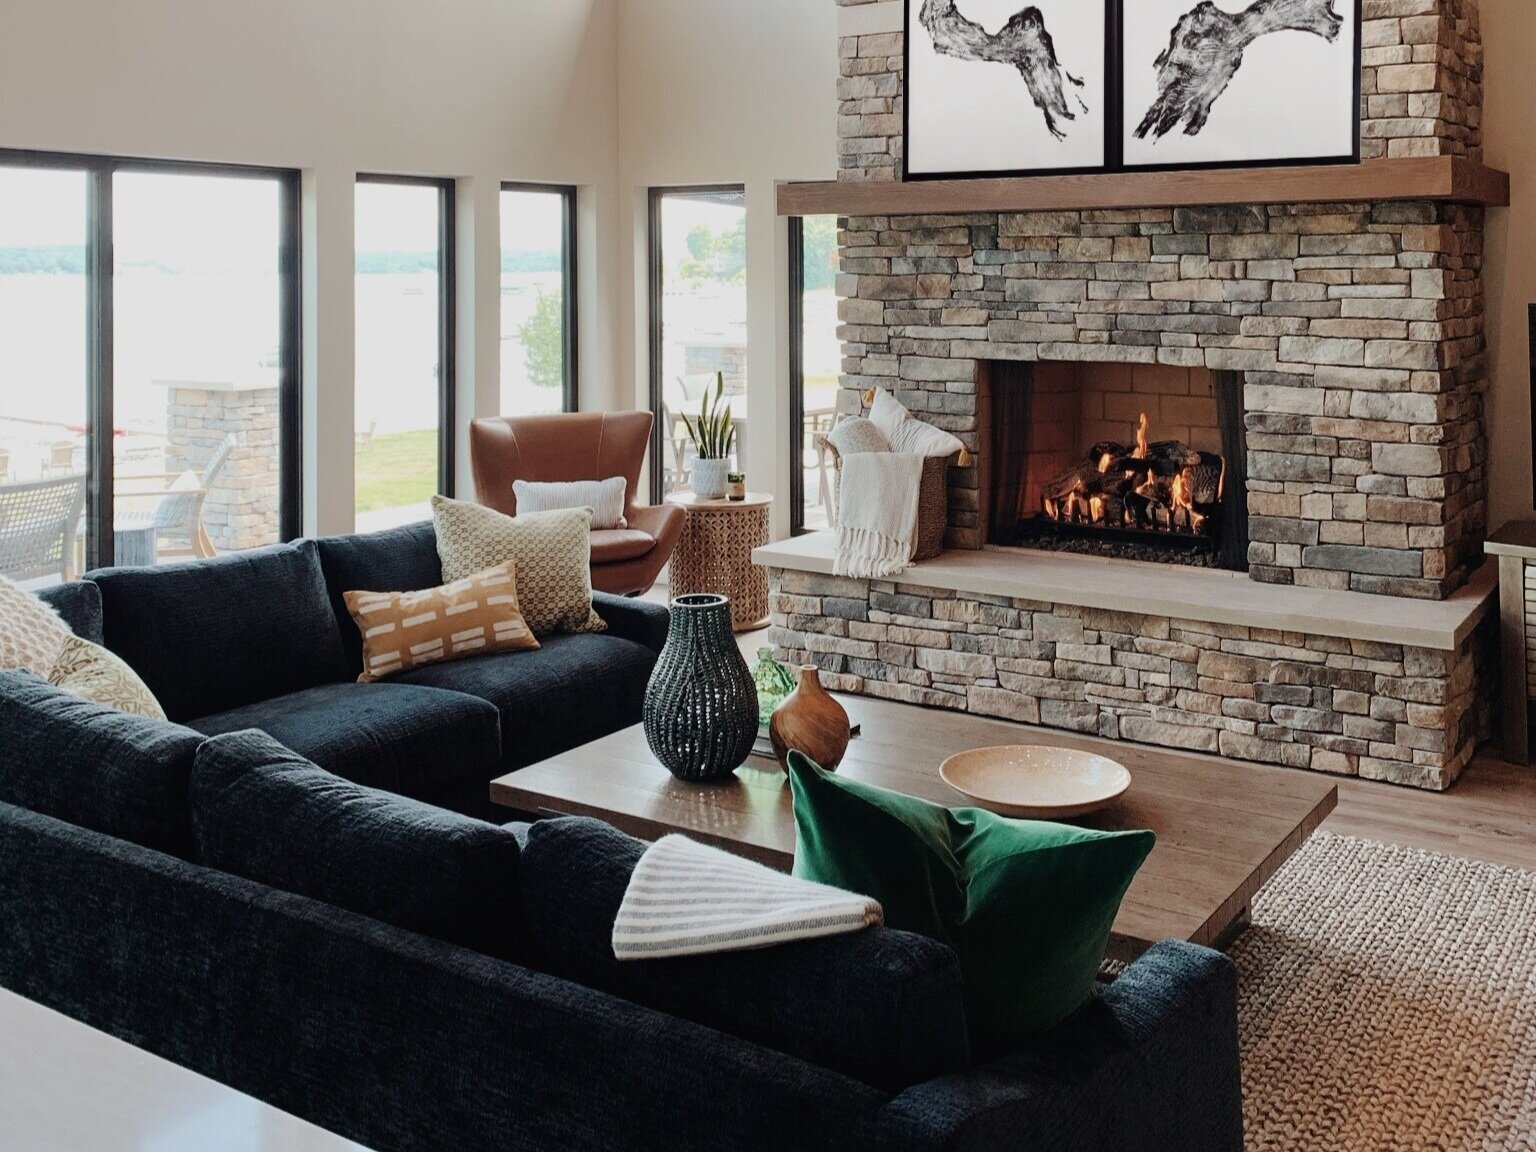  leather chair, stone fireplace, navy sectional, black windows, neutral paint, accessories, chandelier, artwork 